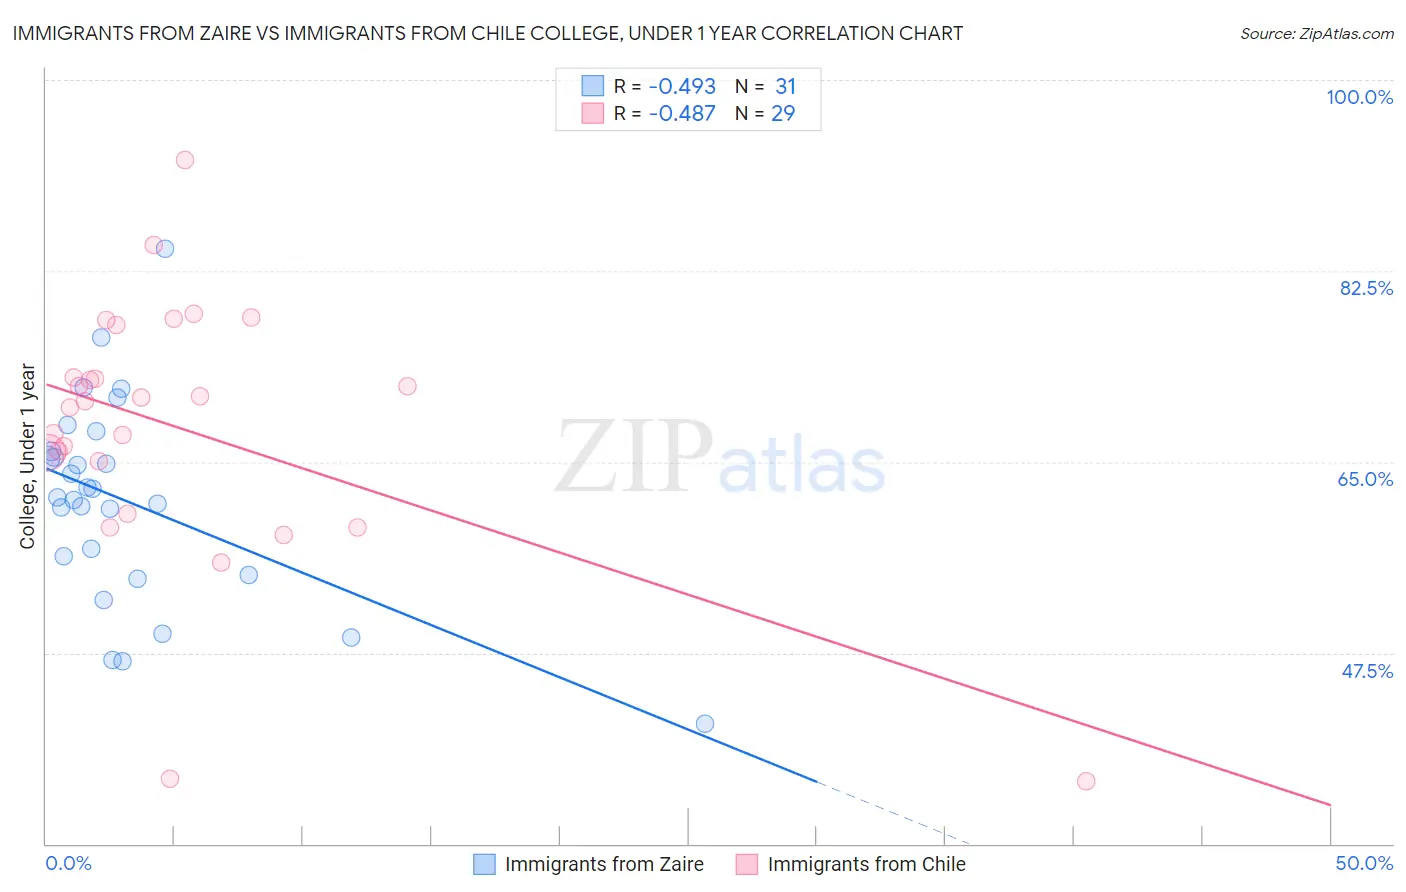 Immigrants from Zaire vs Immigrants from Chile College, Under 1 year